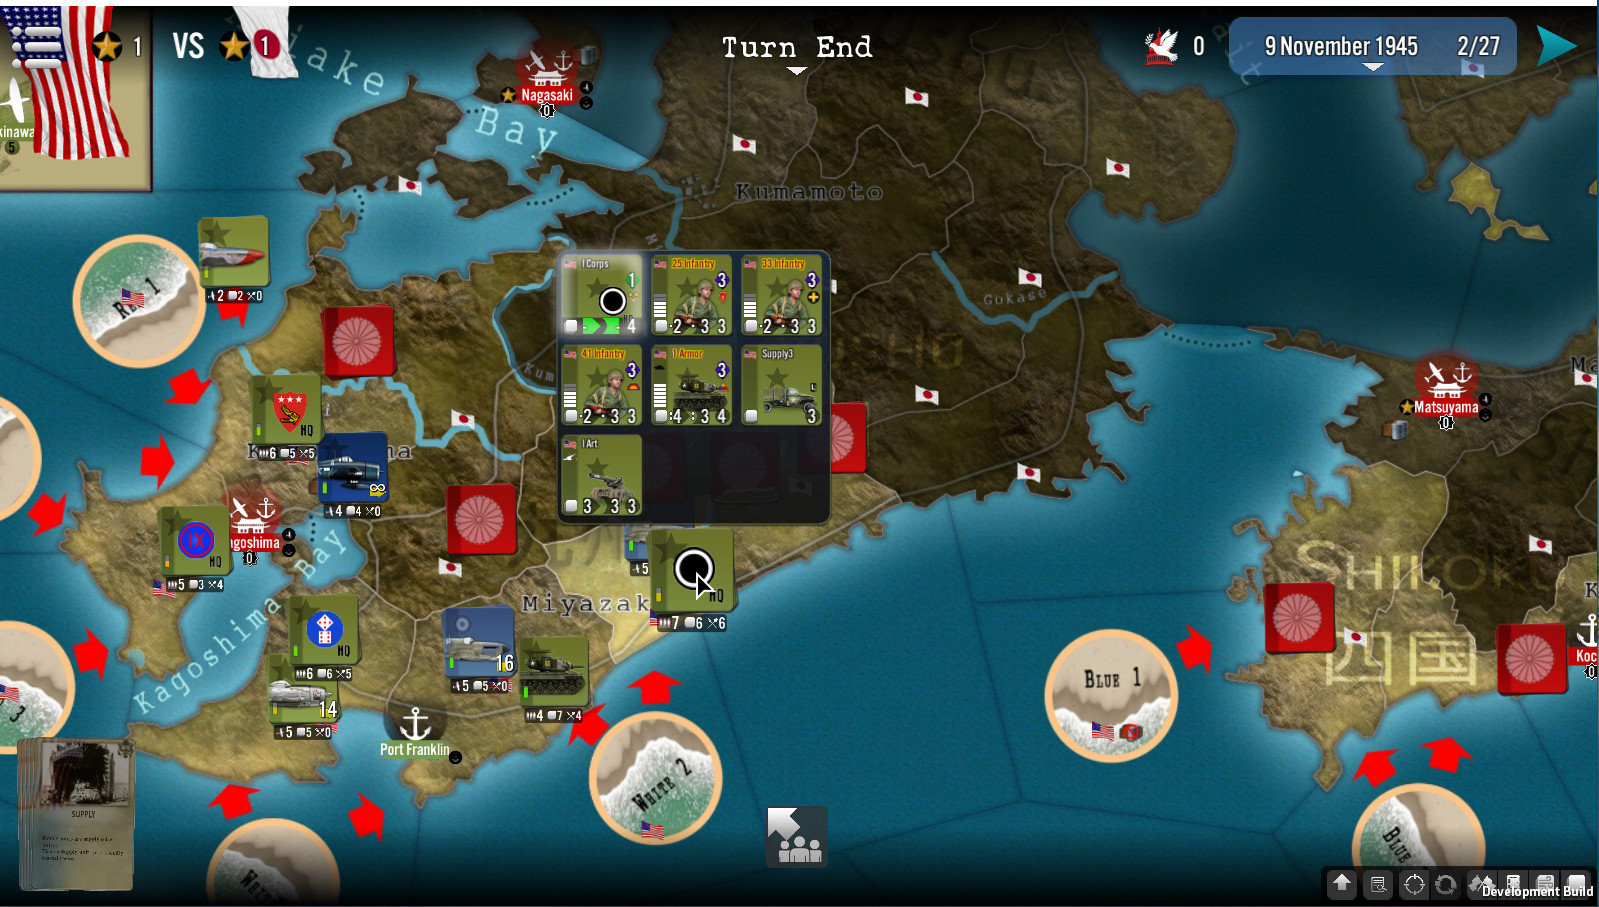 SGS Operation Downfall Free Download